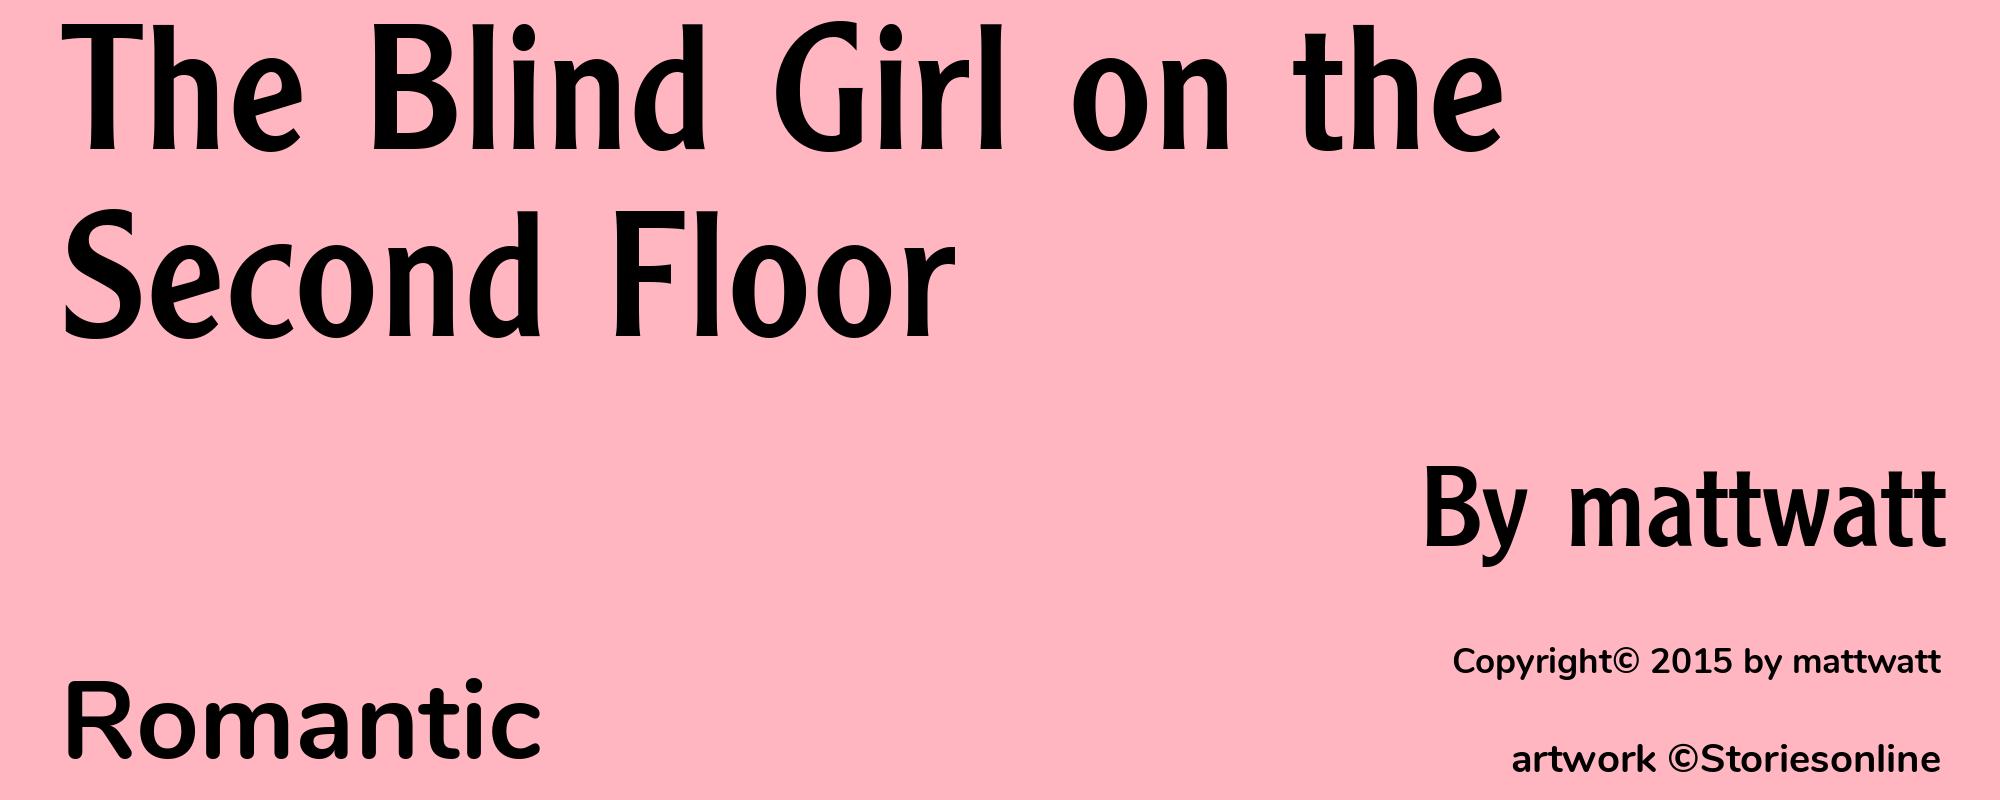 The Blind Girl on the Second Floor - Cover